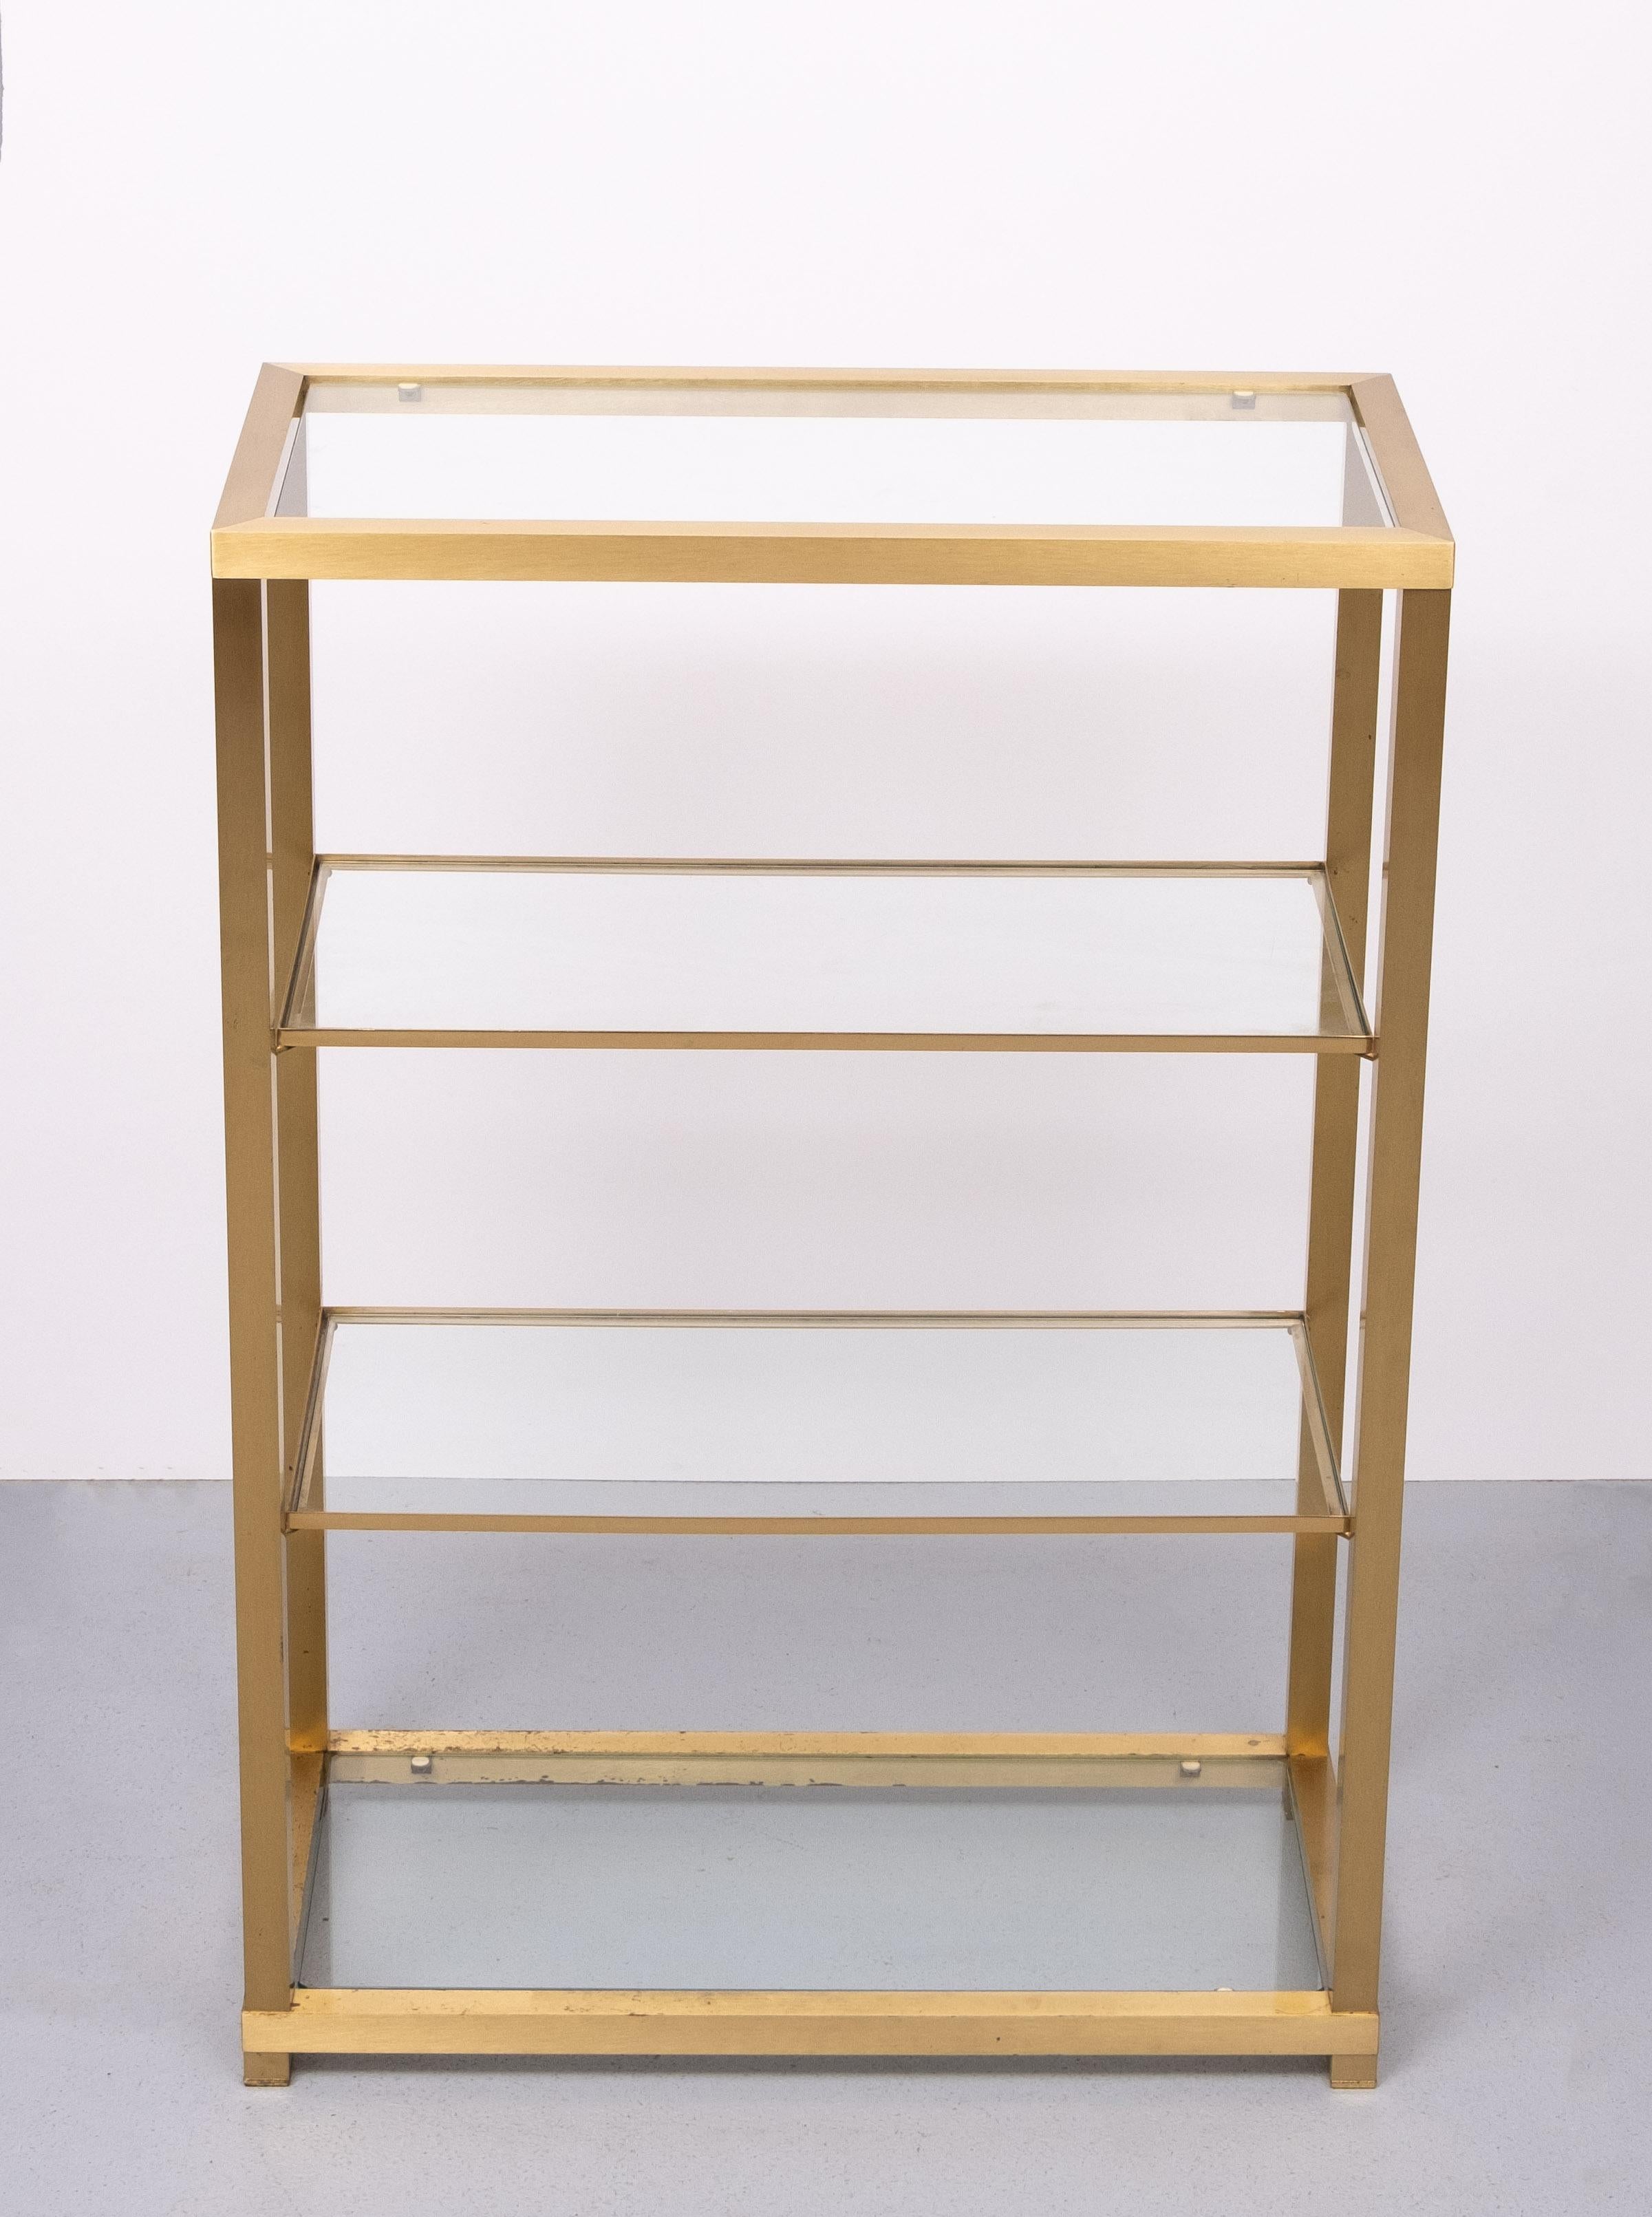 Very nice Etagere or bookcase .Brass 4 tier . Clear Glass tops .
Good quality piece . comes with Just the right amount of patine .